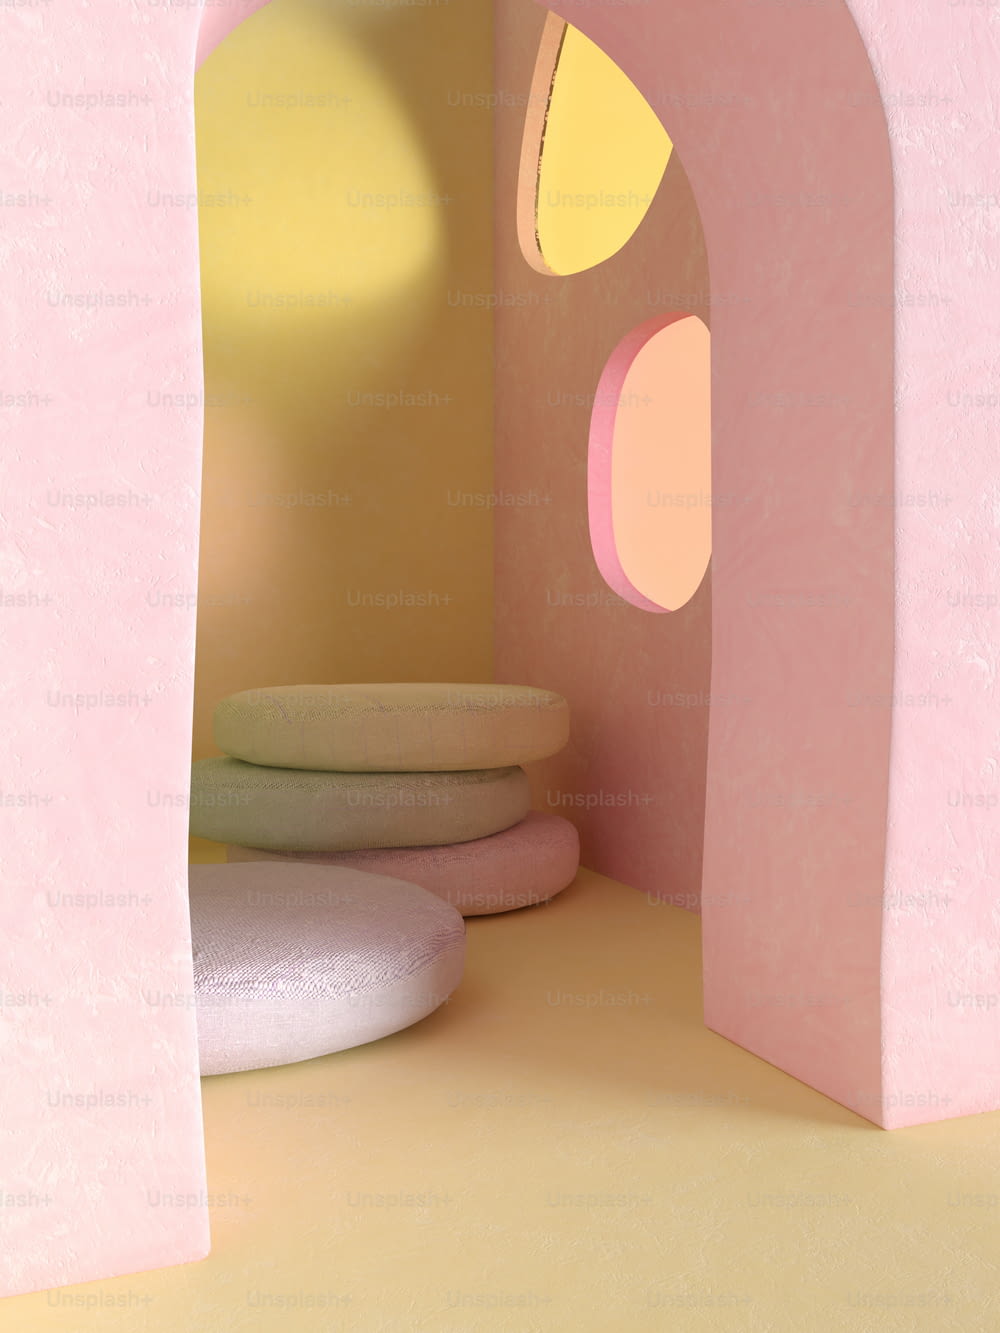 a pink and yellow room with a round object on the floor